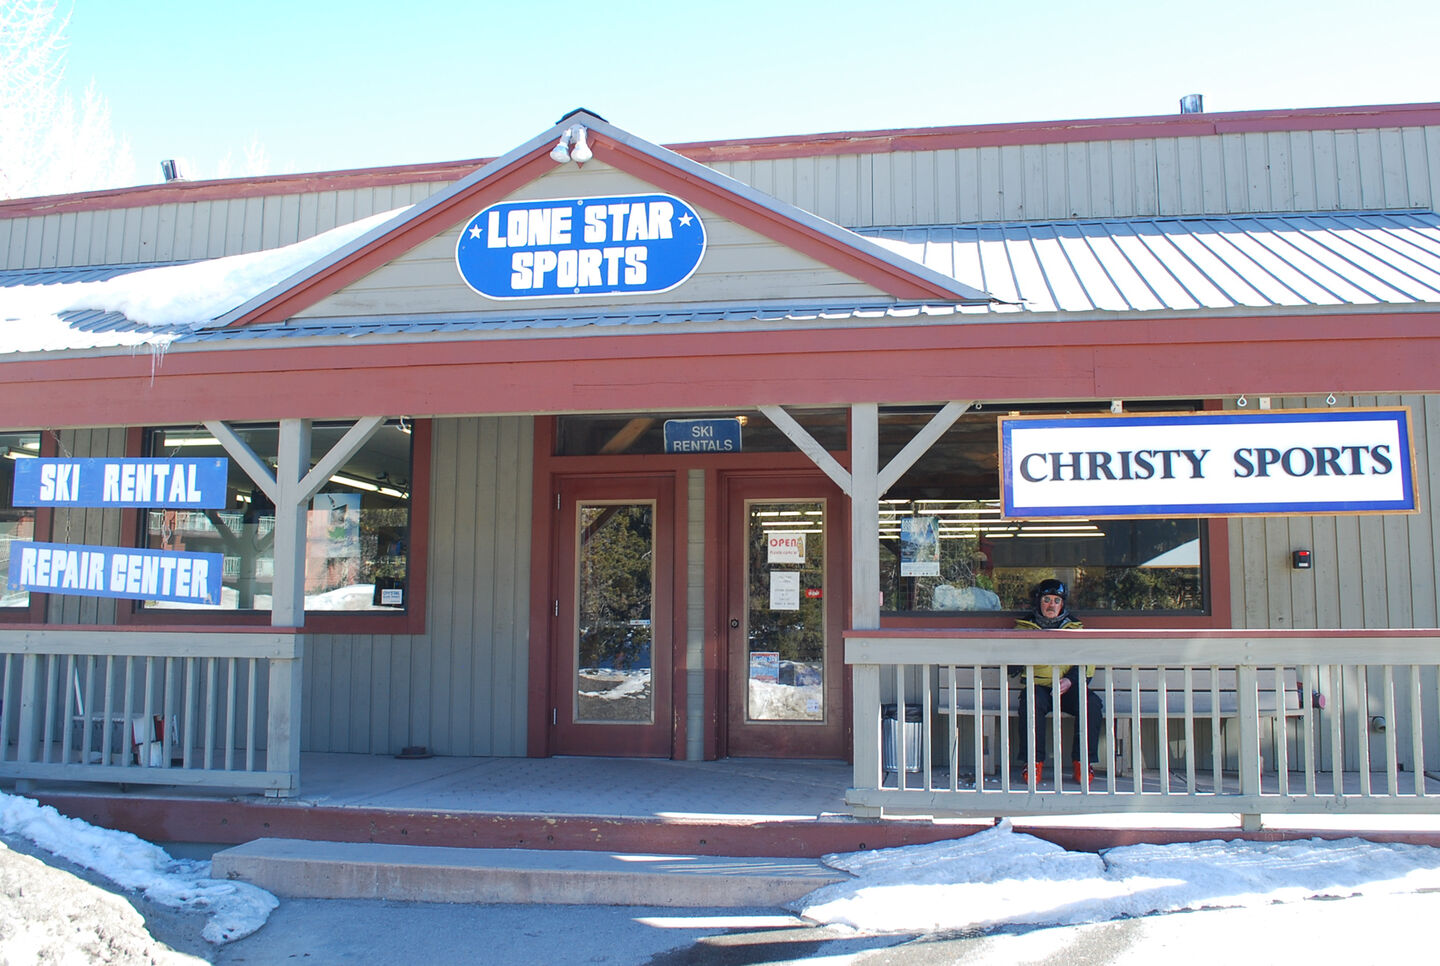 Christy Sports - Breckenridge Lone Star Storefront in the winter